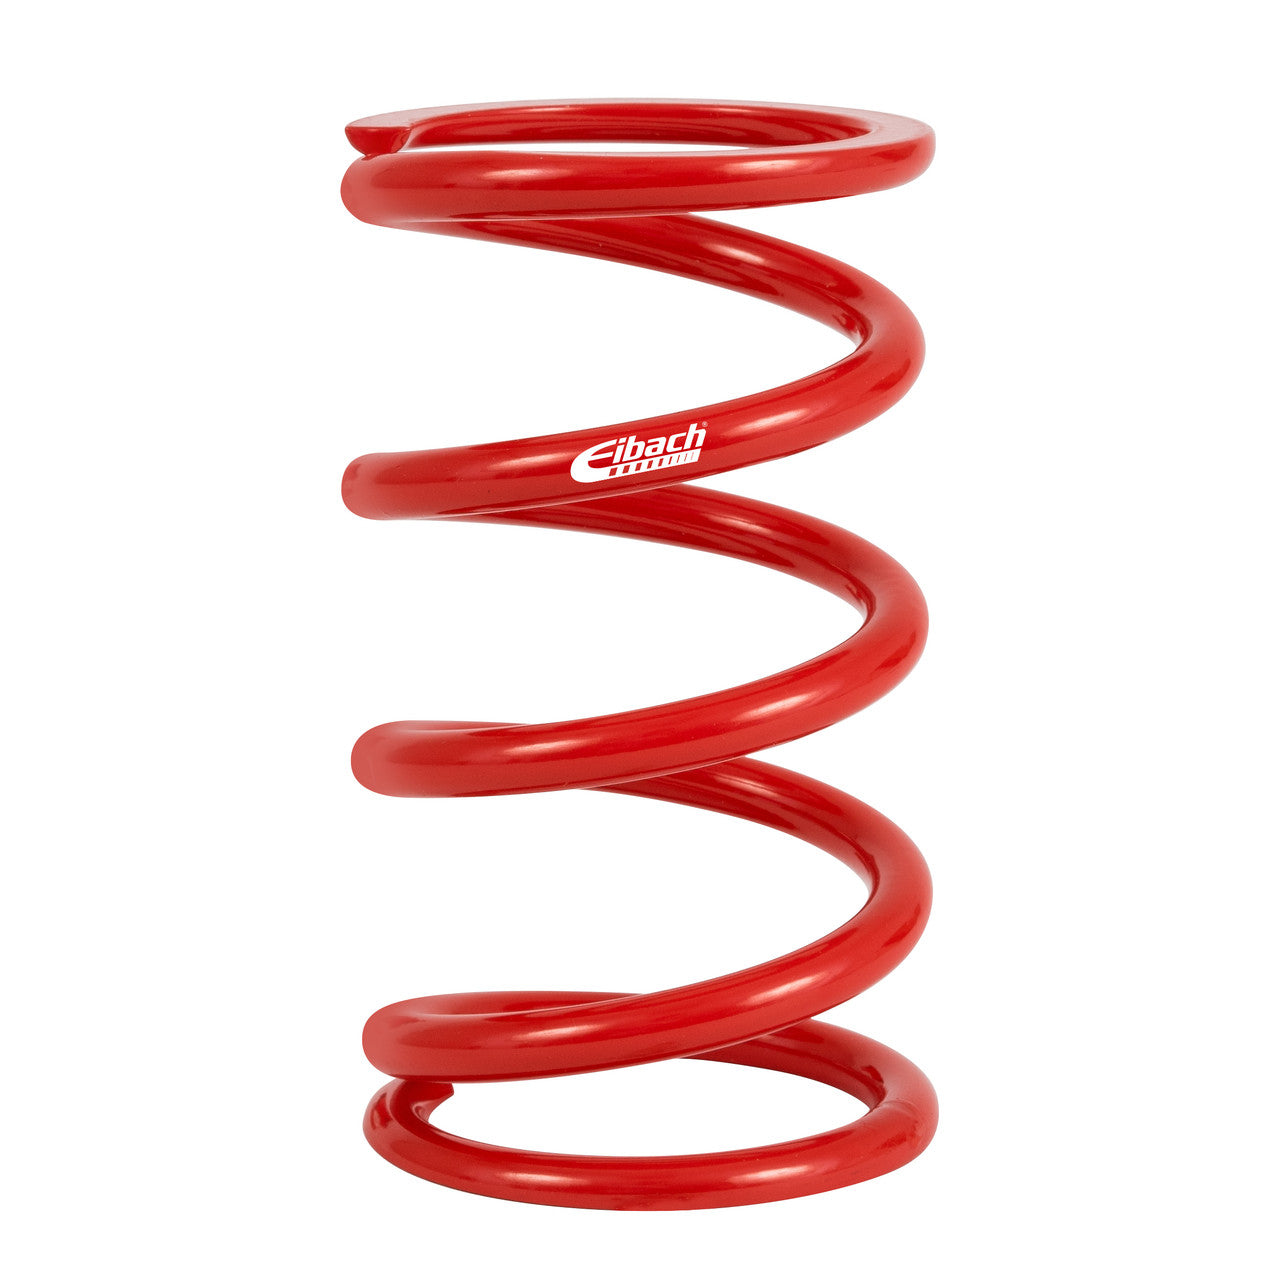 Eibach Metric Coilover Spring - 60MM I.D. 170-60-0190